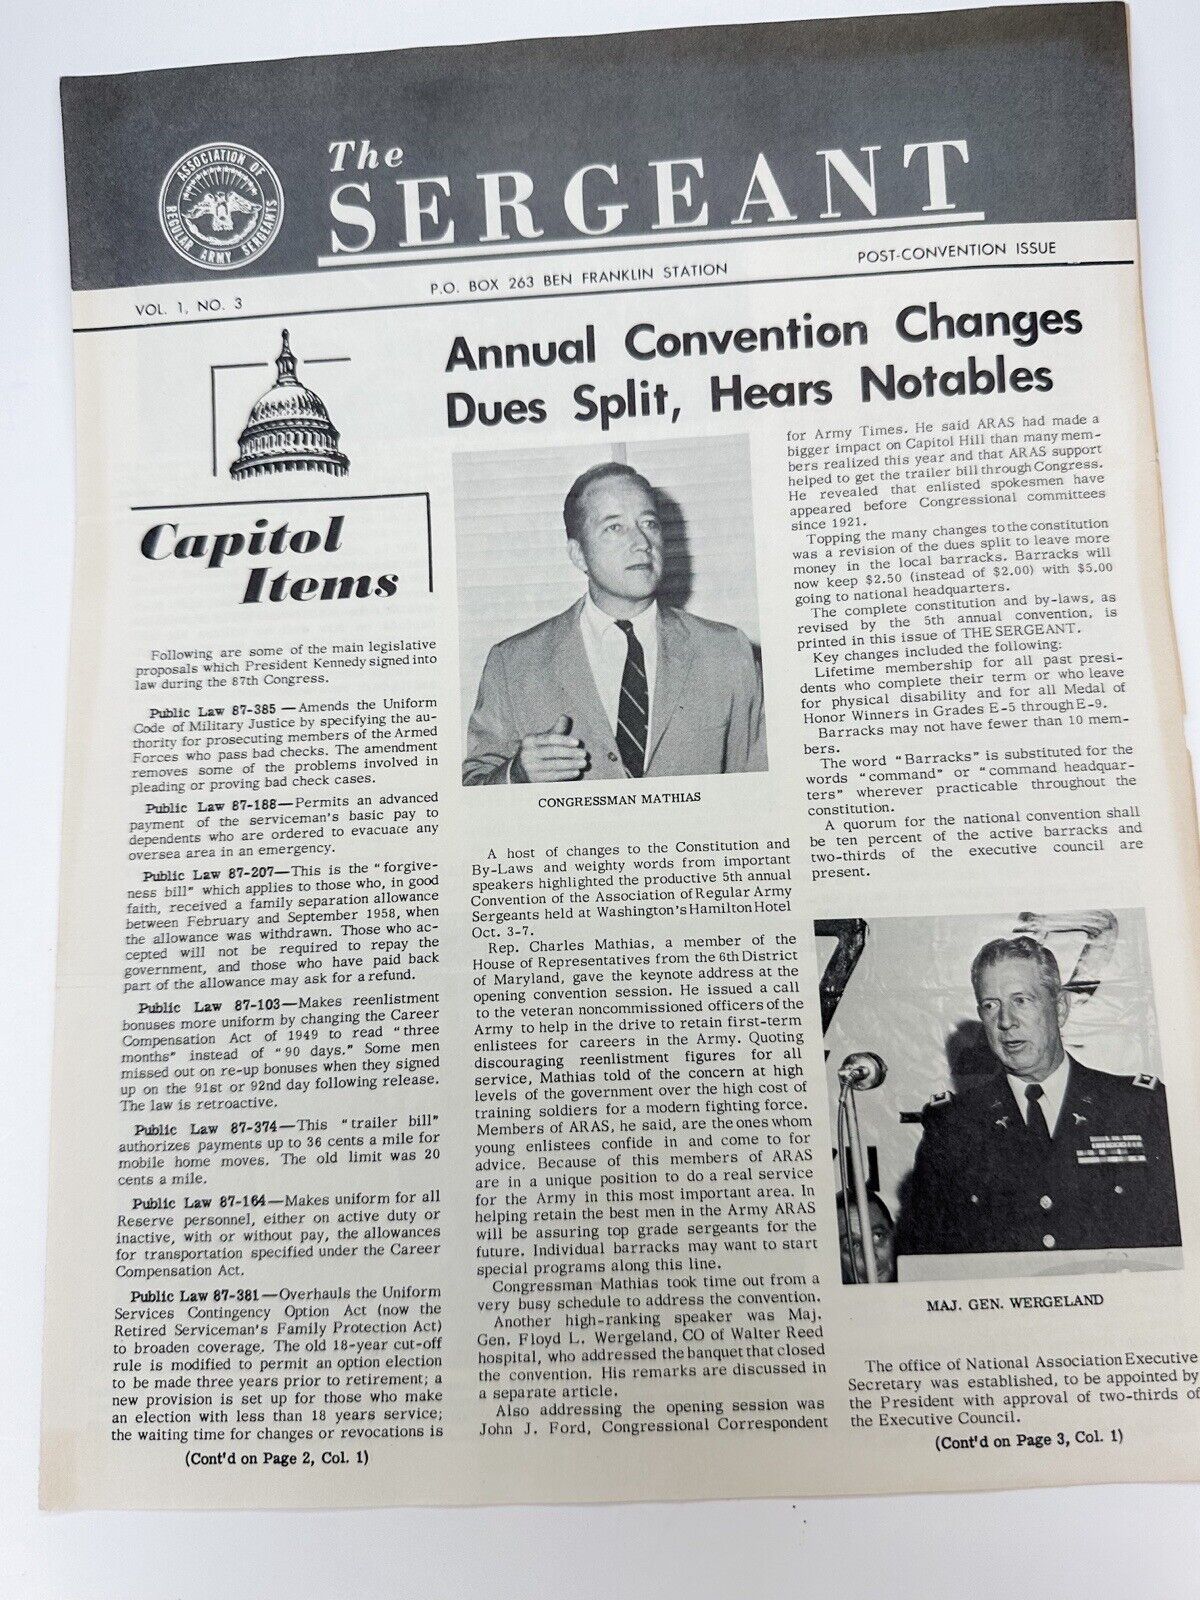 The Sergeant Vol 1 No 3 Post Convention Issue Newsletter 1961